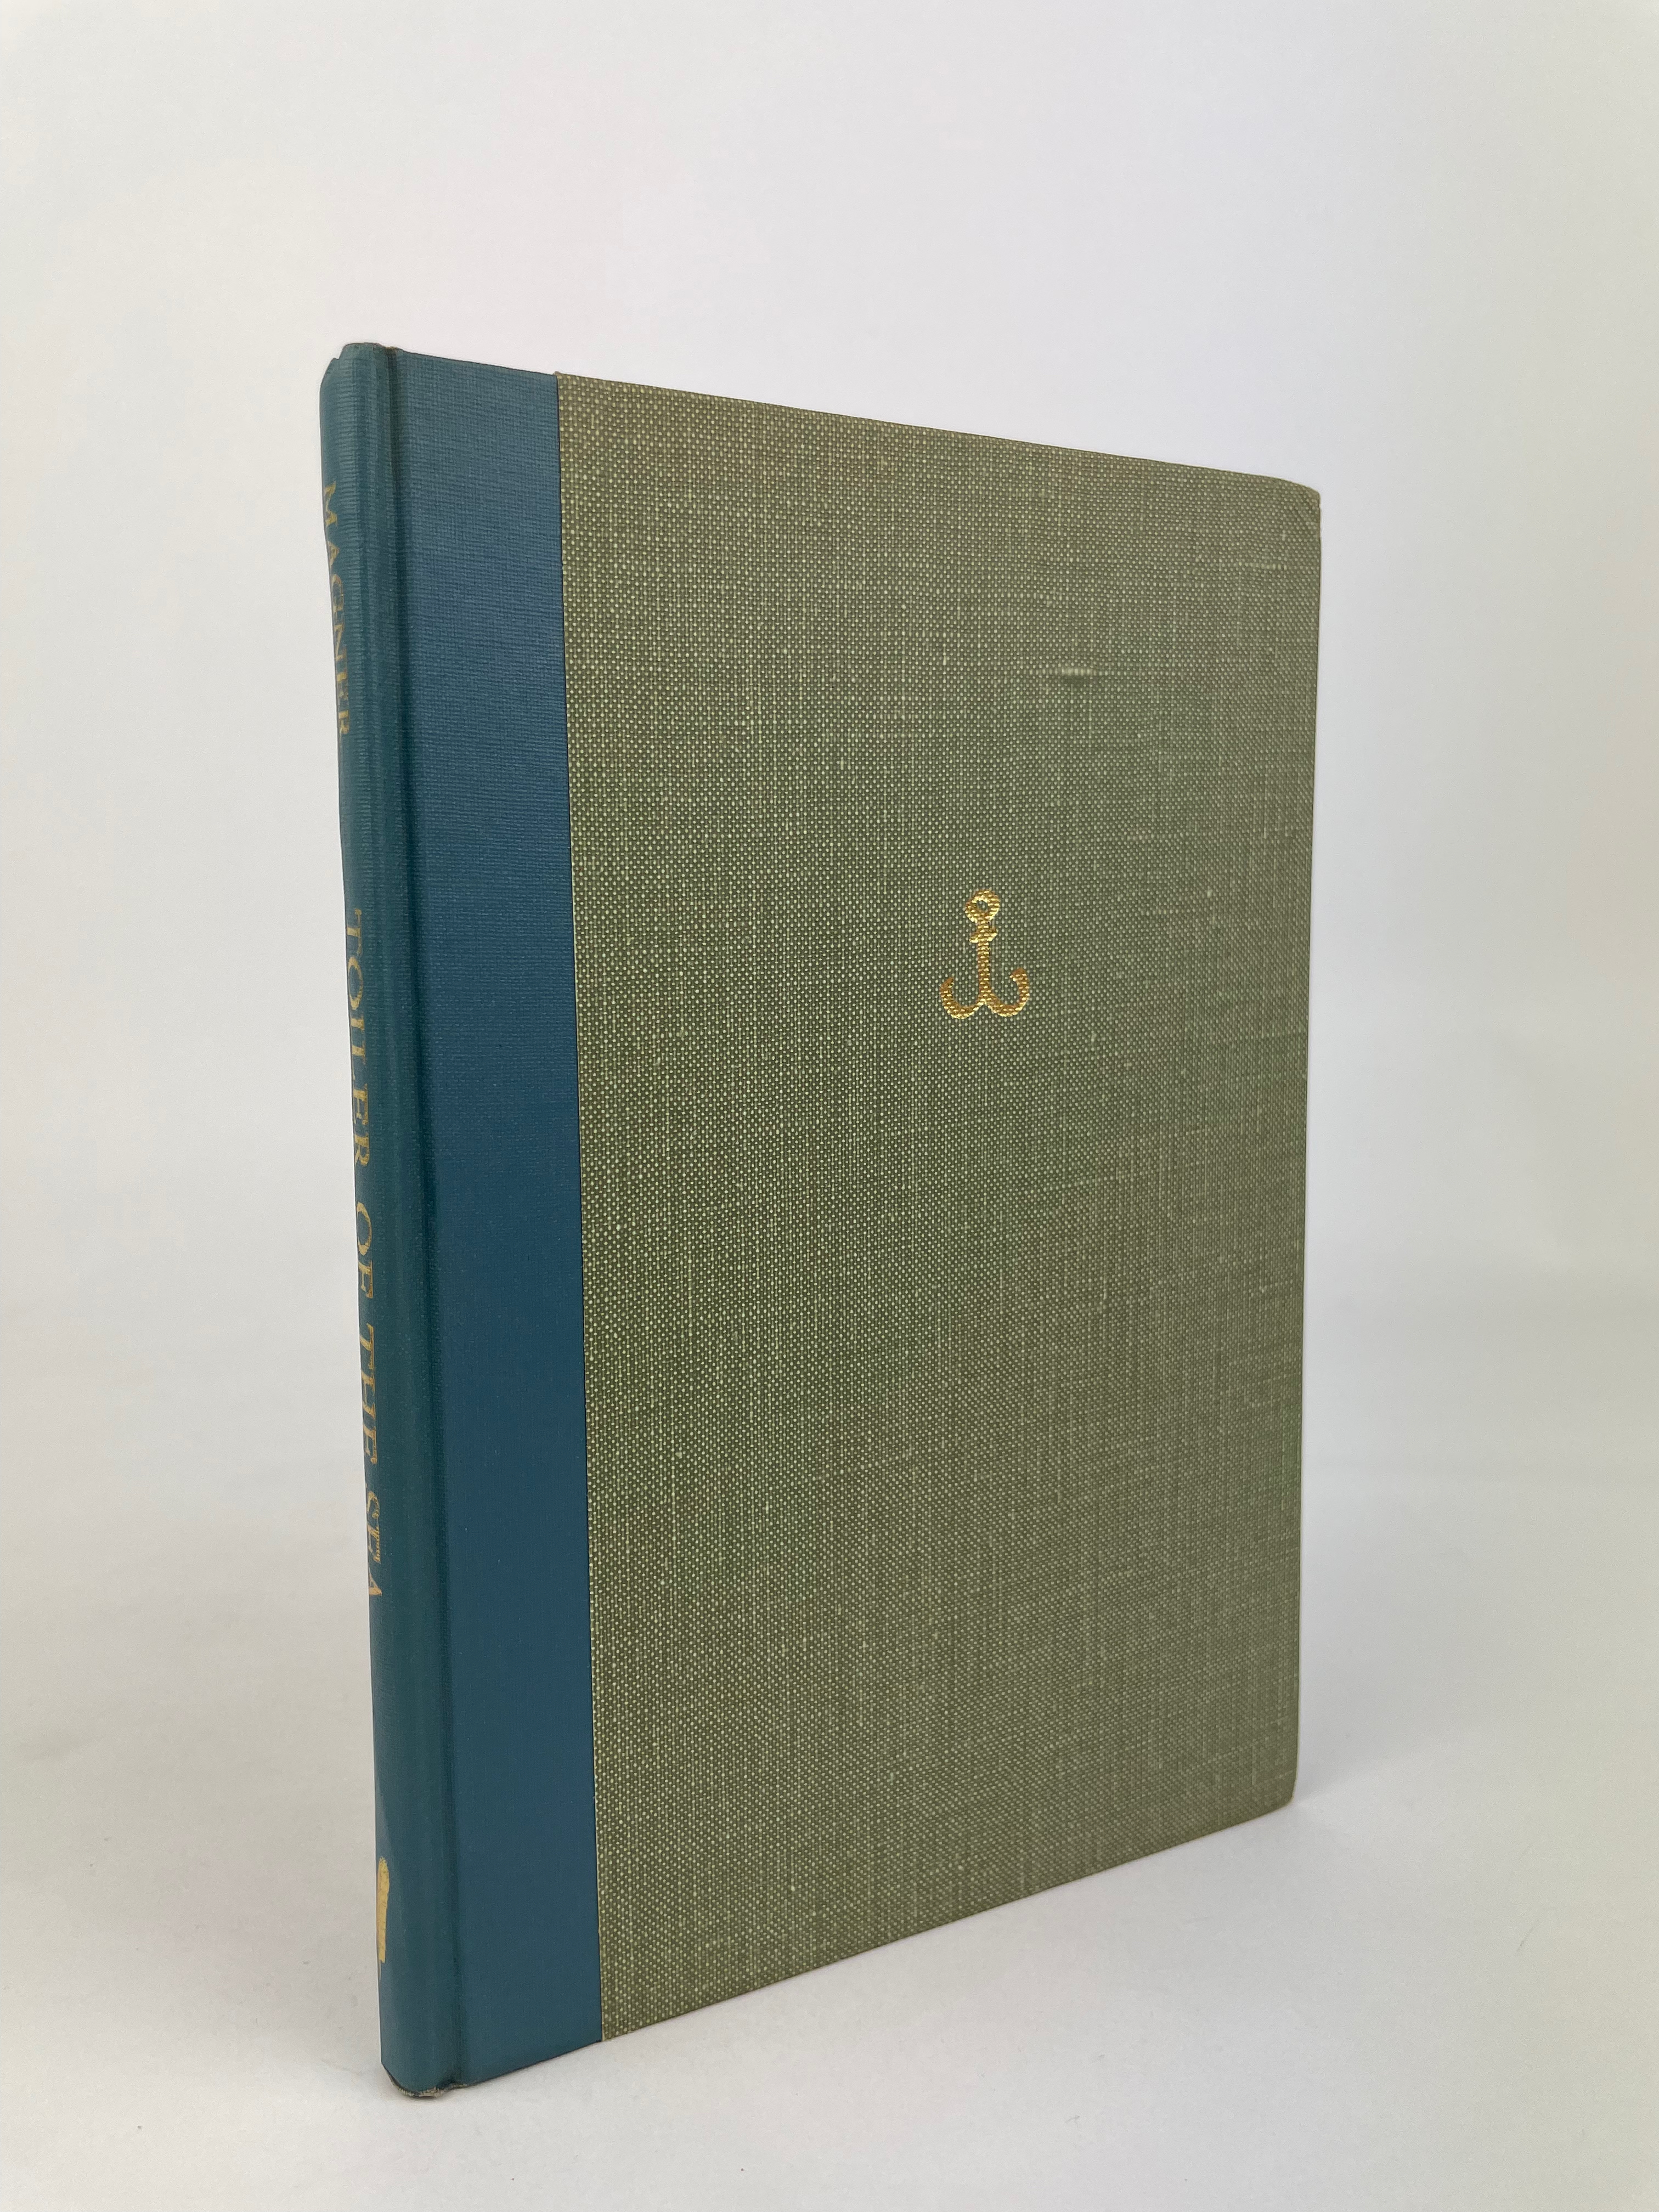 Toiler of the Sea signed and dedicated to J.R.R. Tolkien 17